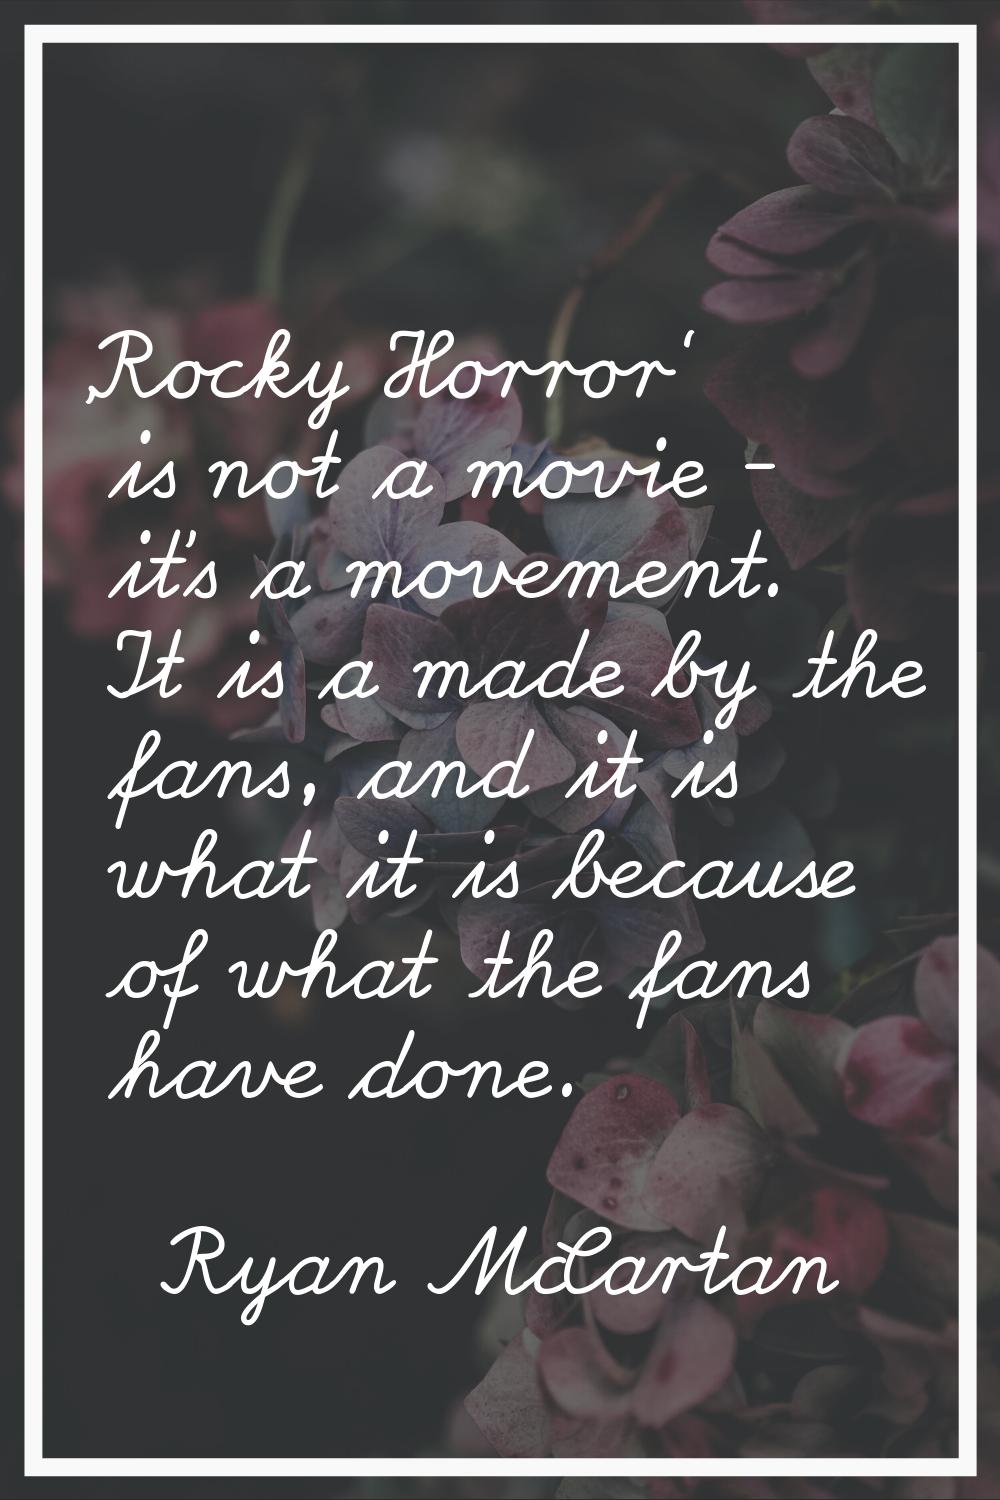 'Rocky Horror' is not a movie - it's a movement. It is a made by the fans, and it is what it is bec